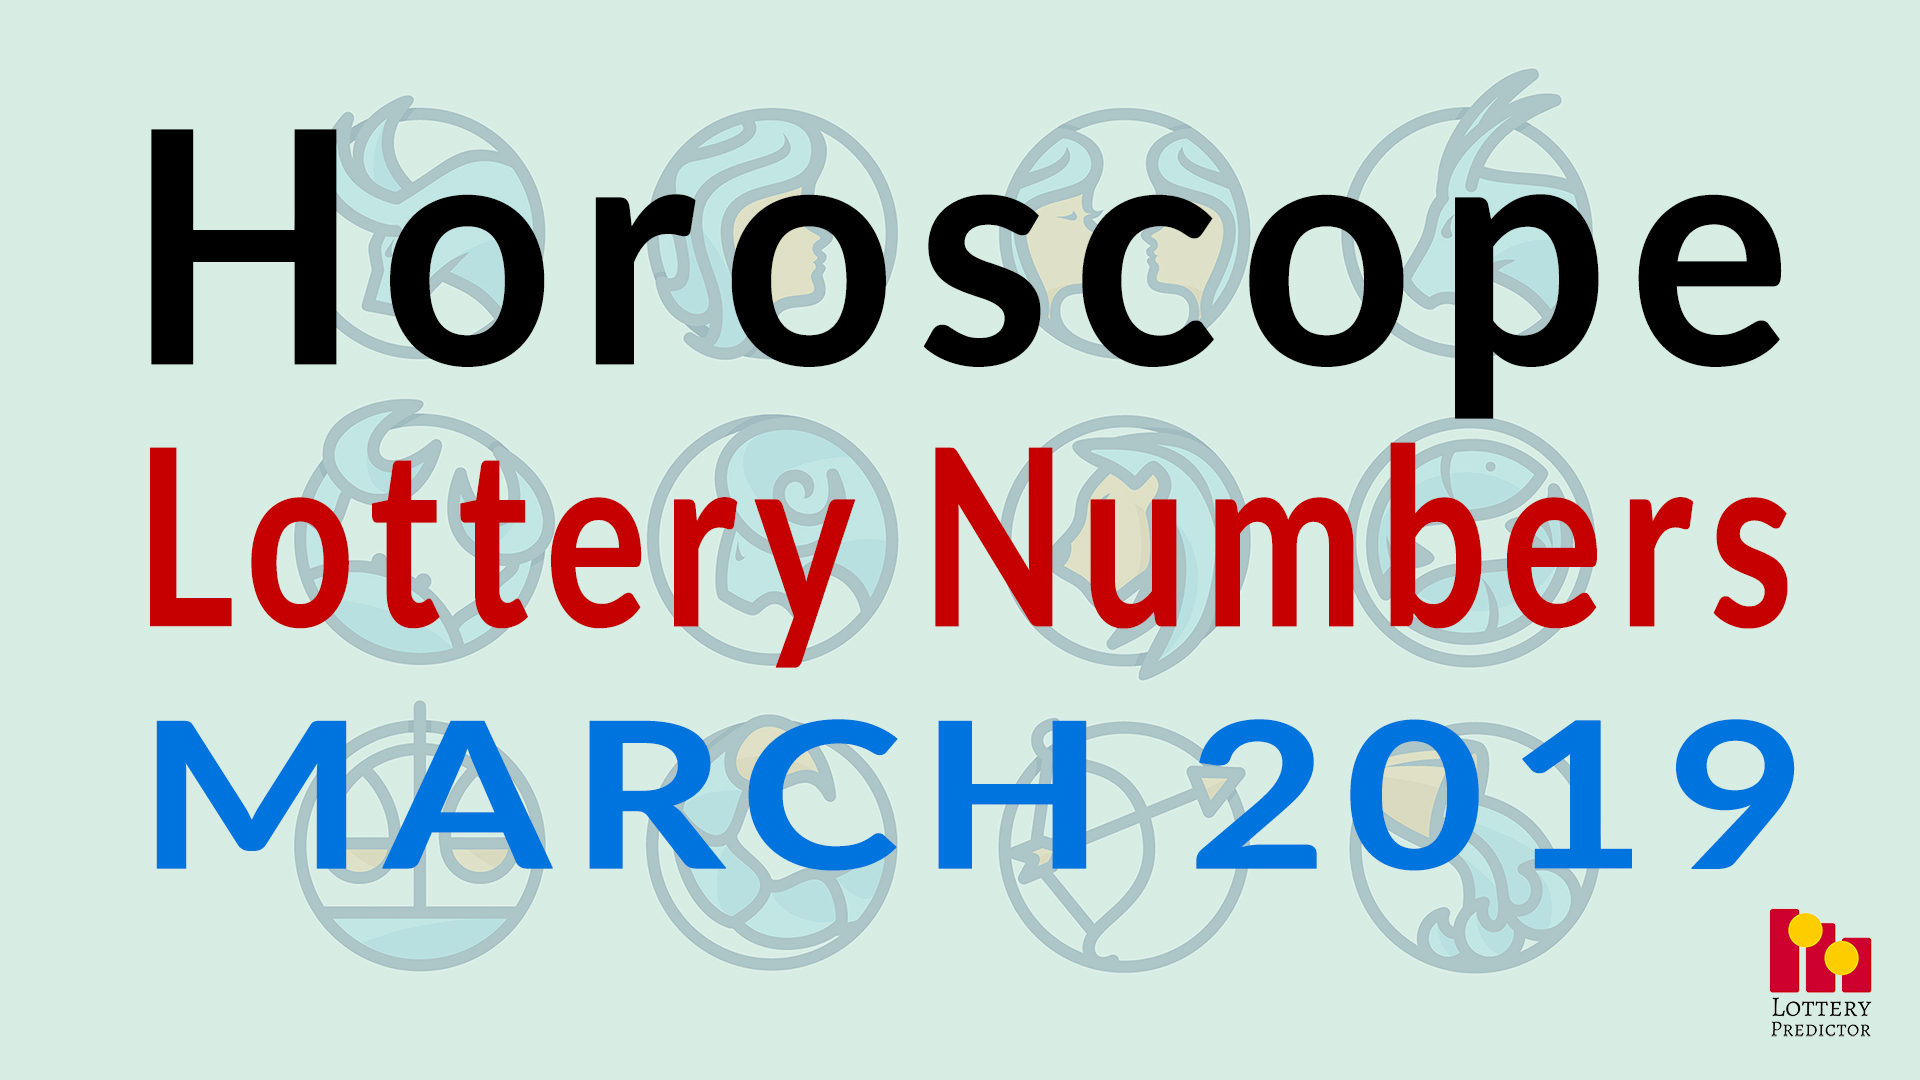 lucky lotto numbers for aries 2019